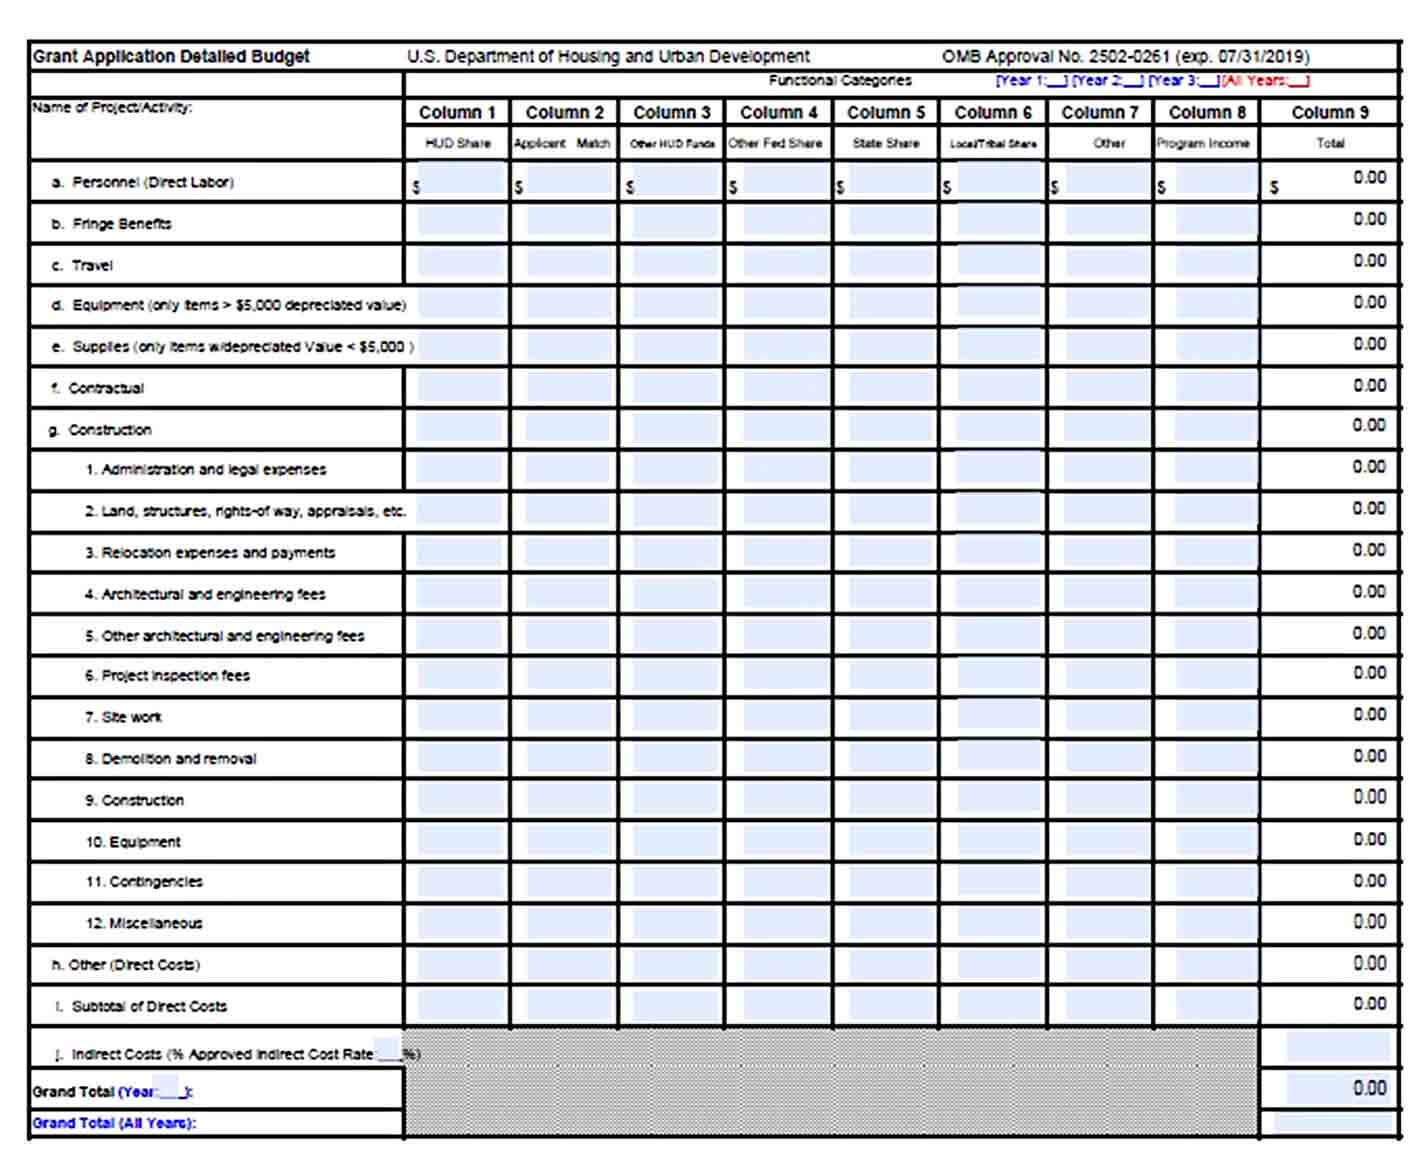 Grant Application Budget Template